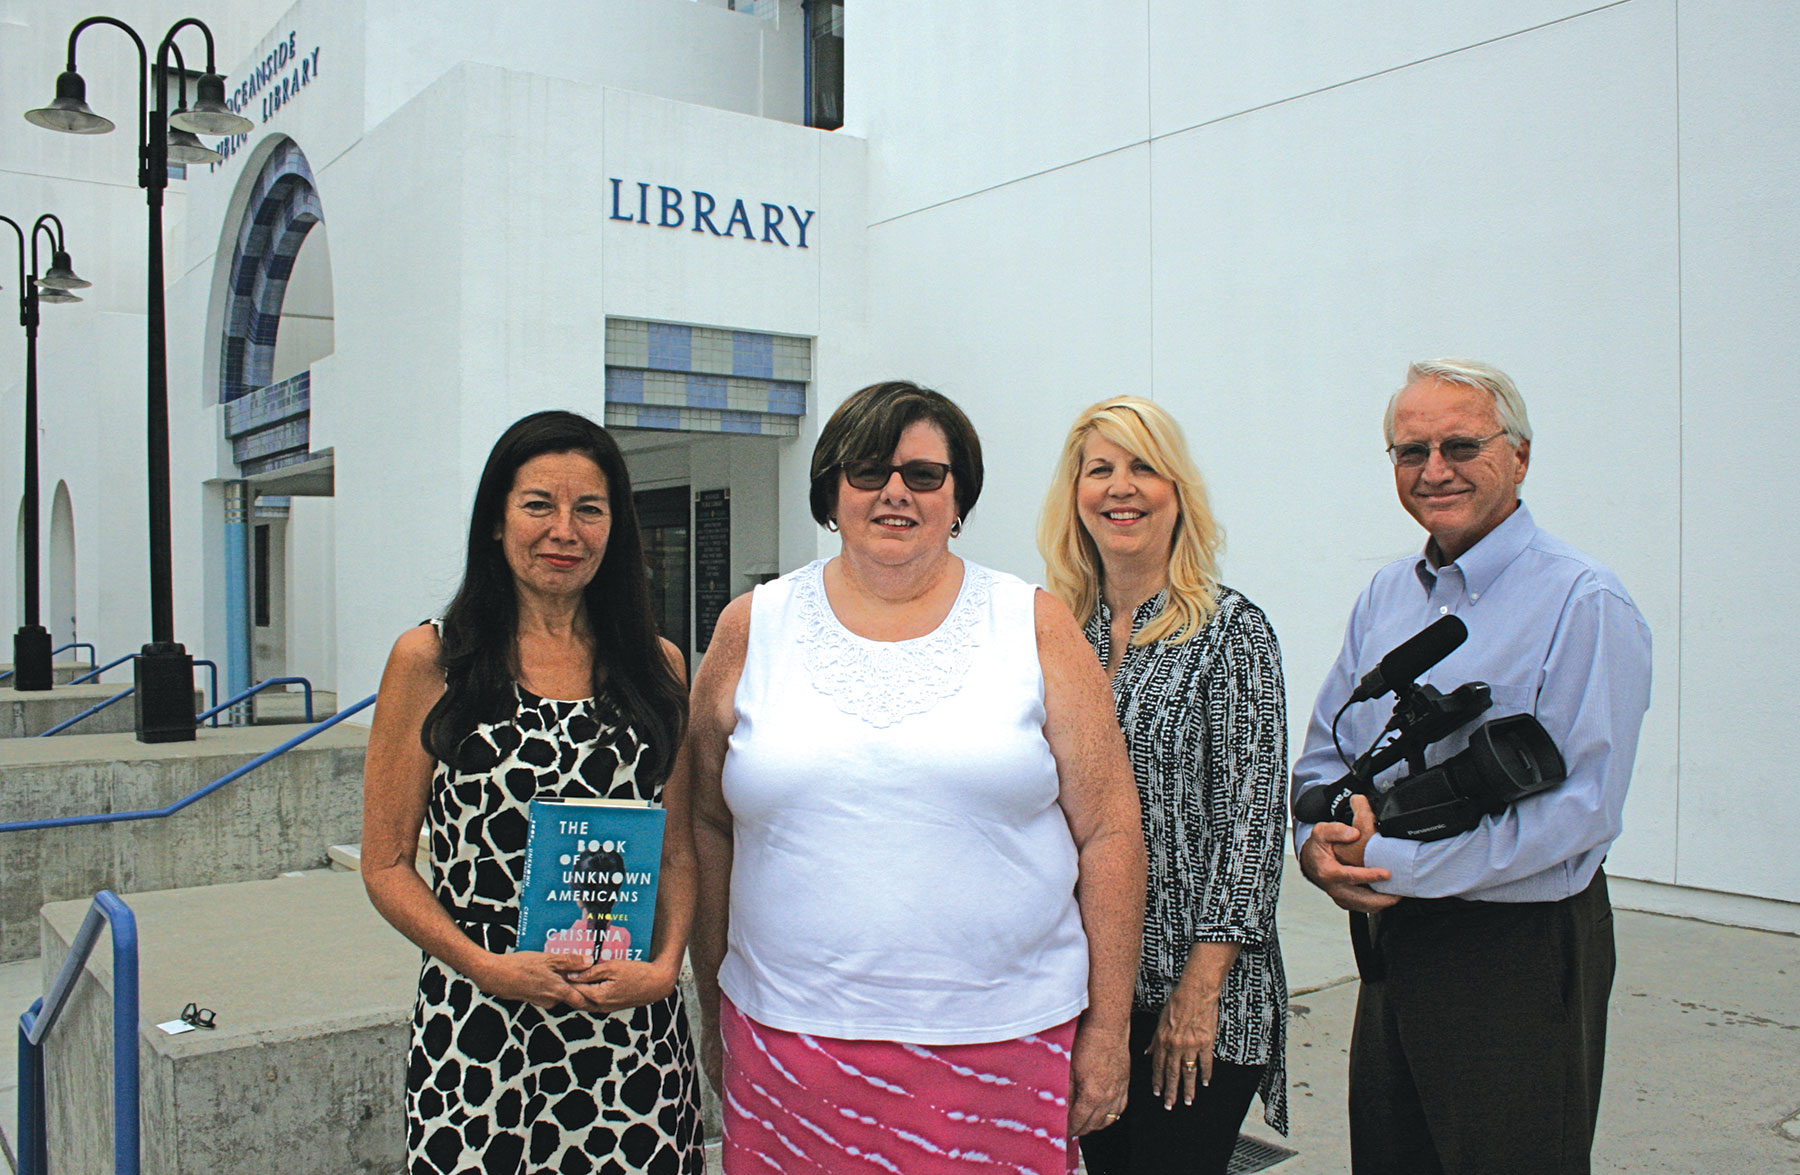 From left: Monica Chapa-Domercq, principal librarian, Sherri Cosby, library director, Kristi Hawthorne, Oceanside Historical Society president, and Tom Reeser, KOCT executive director, join forces to present programs on Latino history. The project will collect local first hand accounts and photos. Photo by Promise Yee